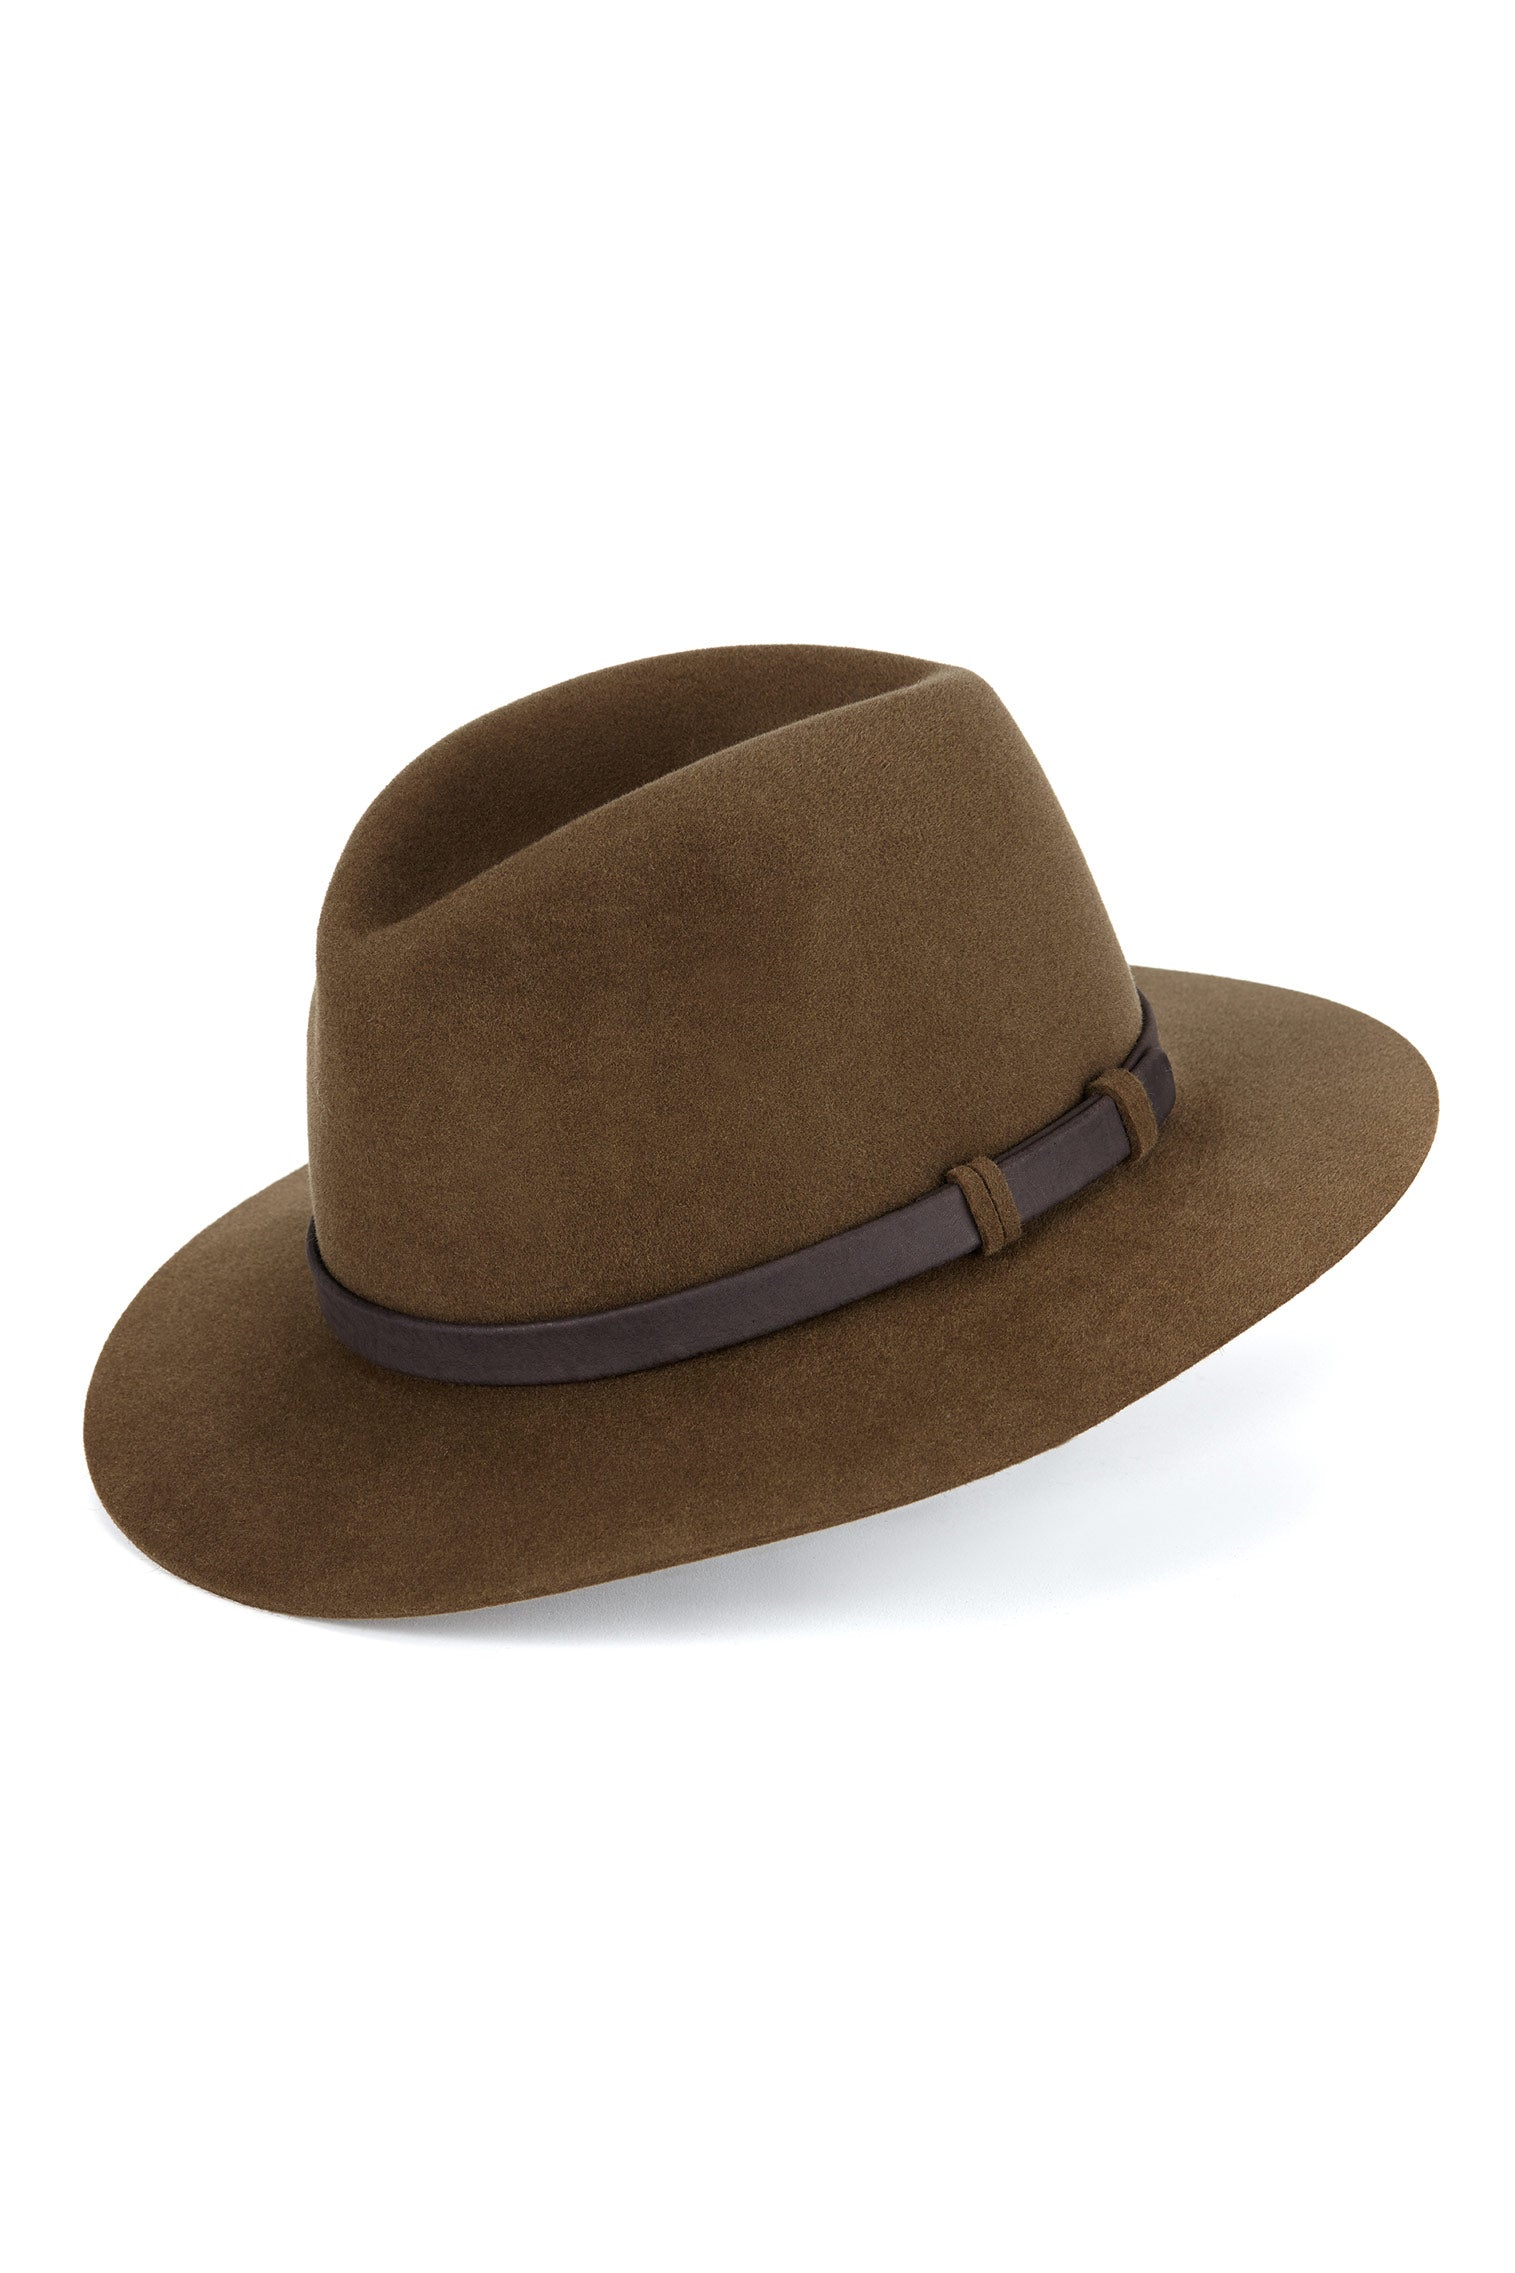 Chepstow Trilby - Hats for Oval Face Shapes - Lock & Co. Hatters London UK